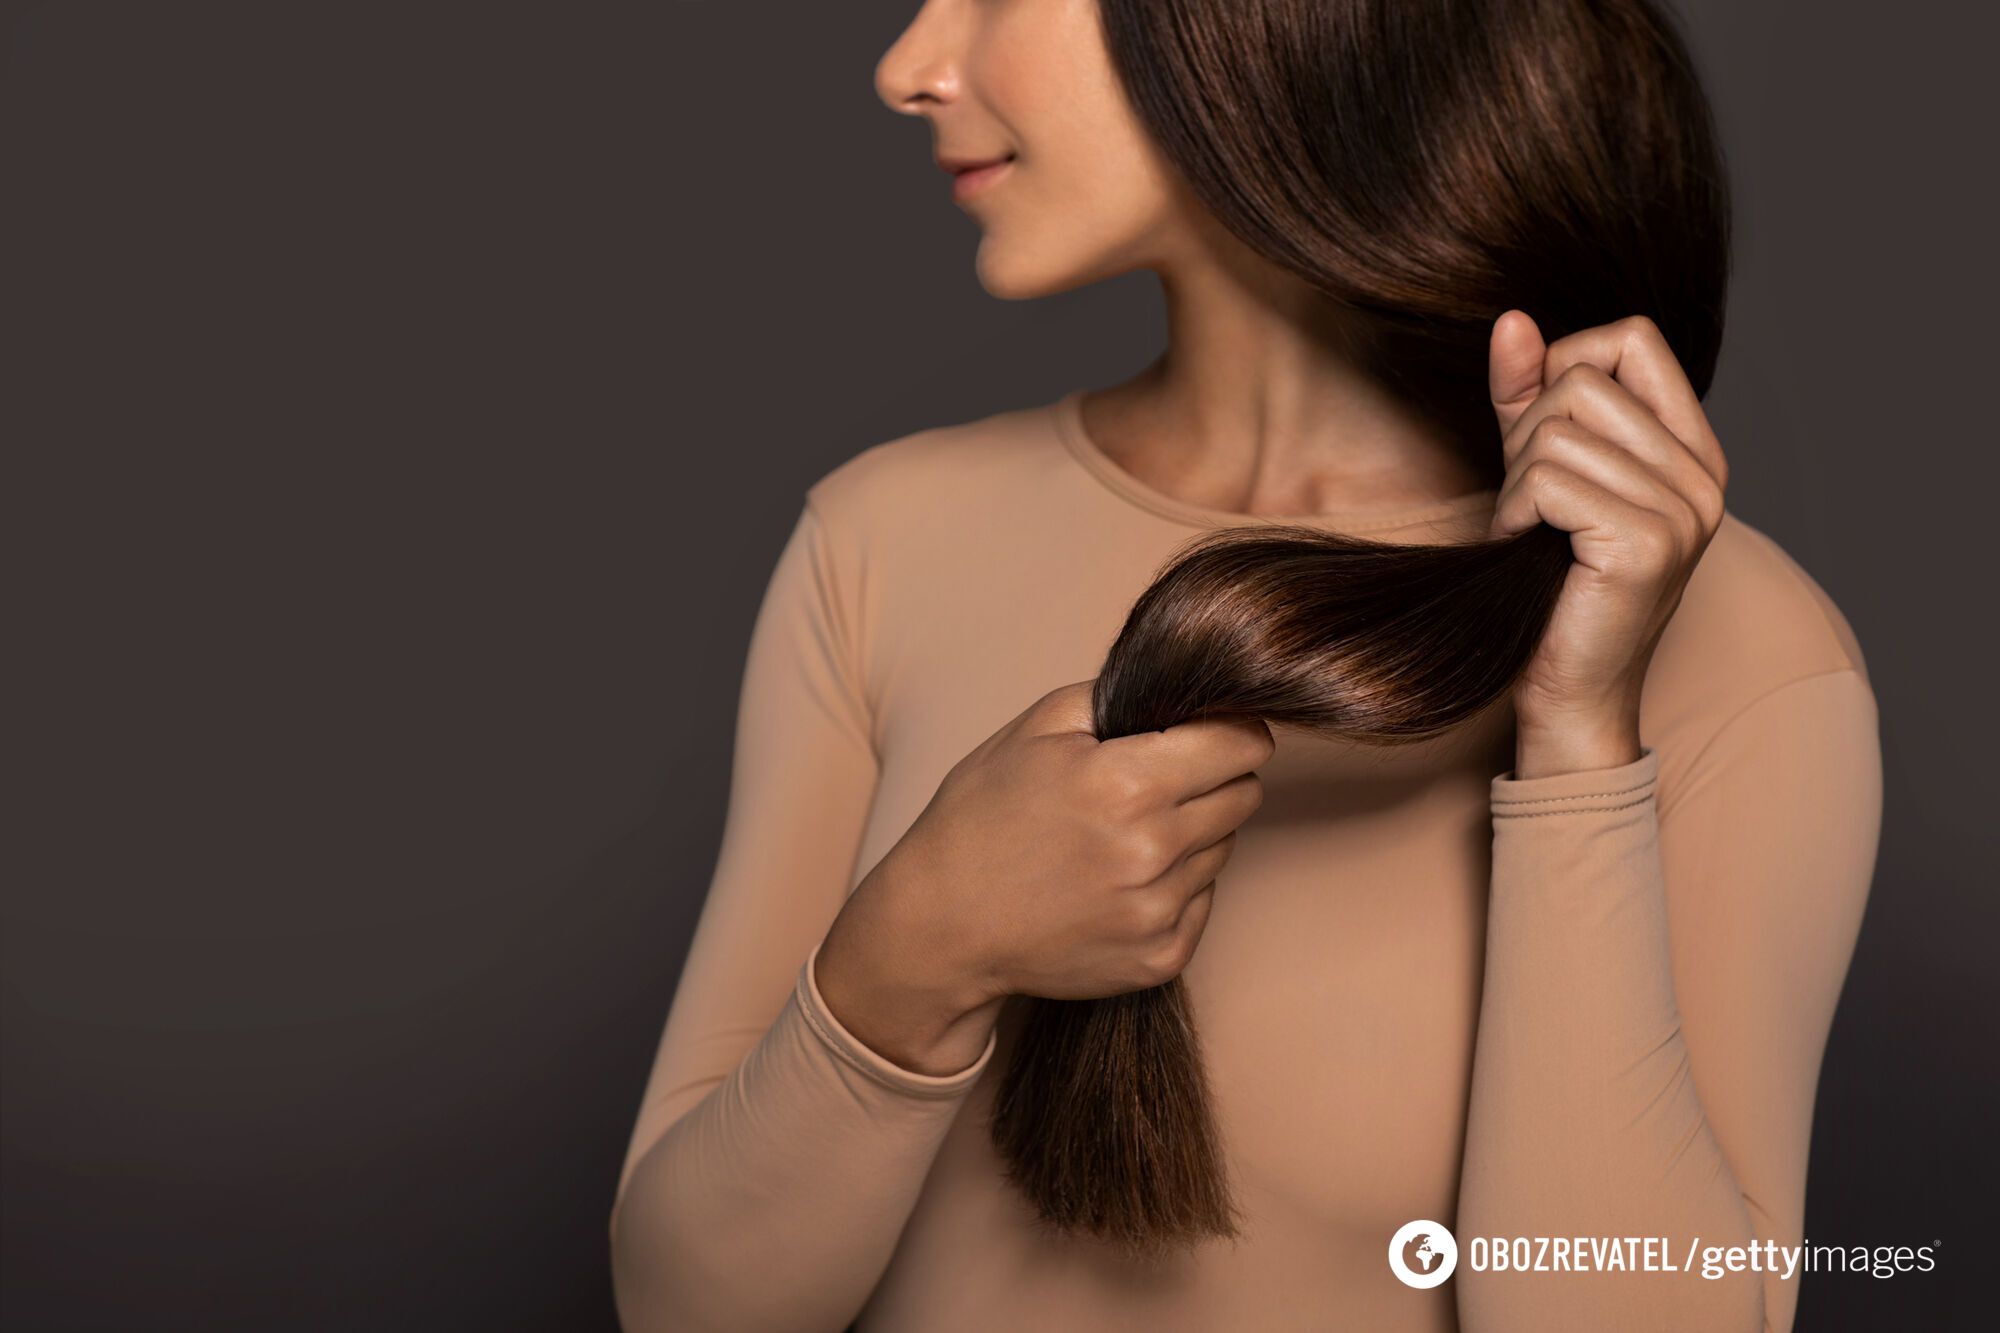 How to accelerate hair growth: methods and tips that really work